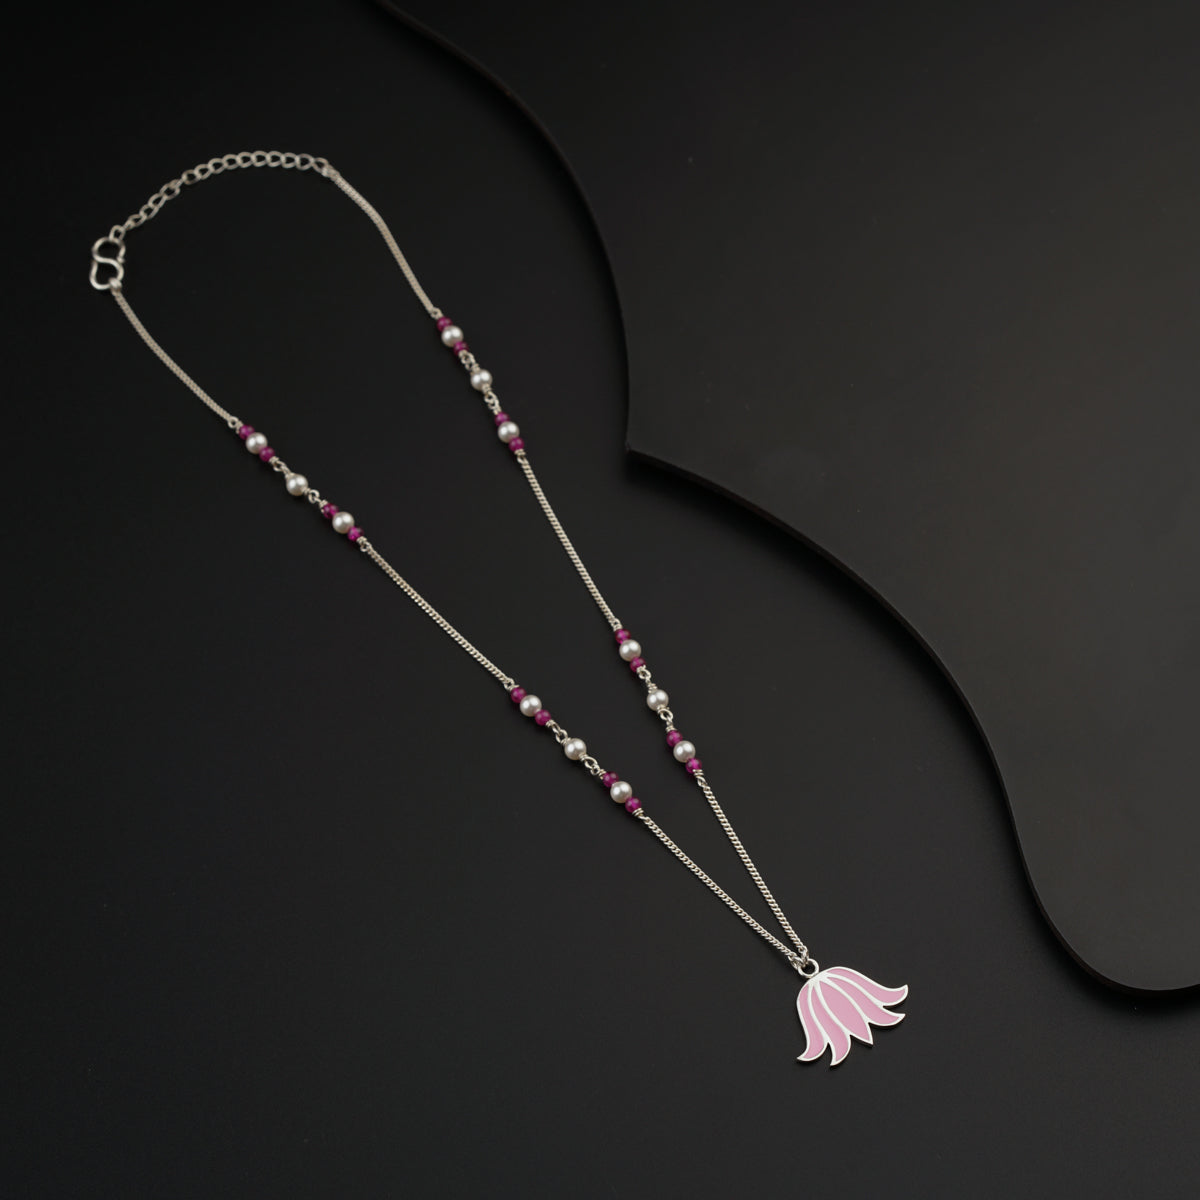 a long necklace with a pink flower on it